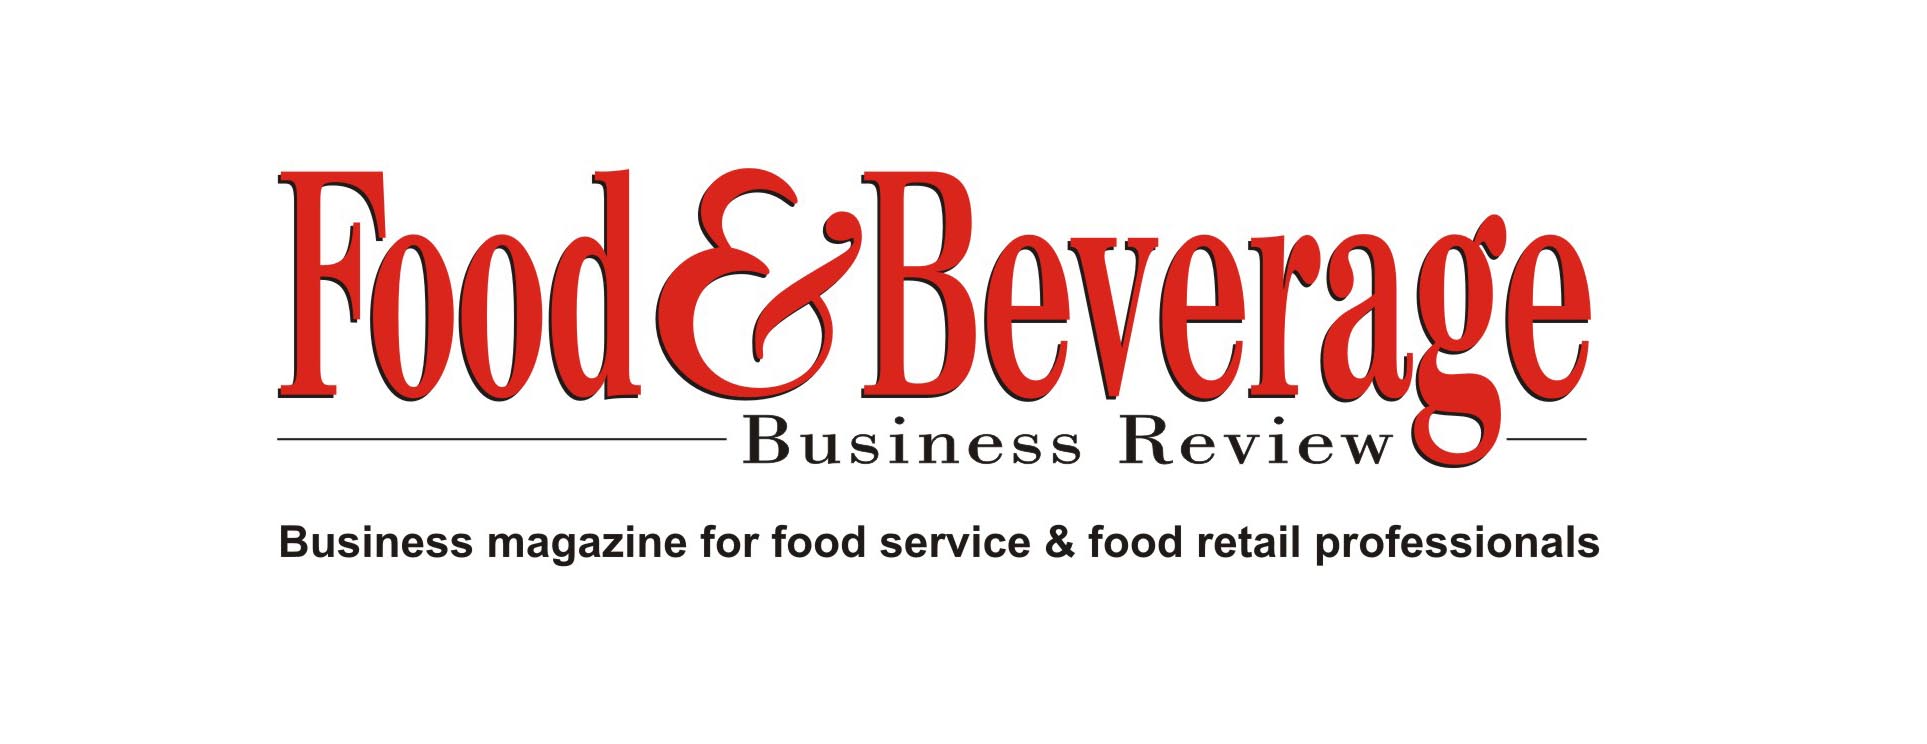 Logo Food & Beverage Business Review